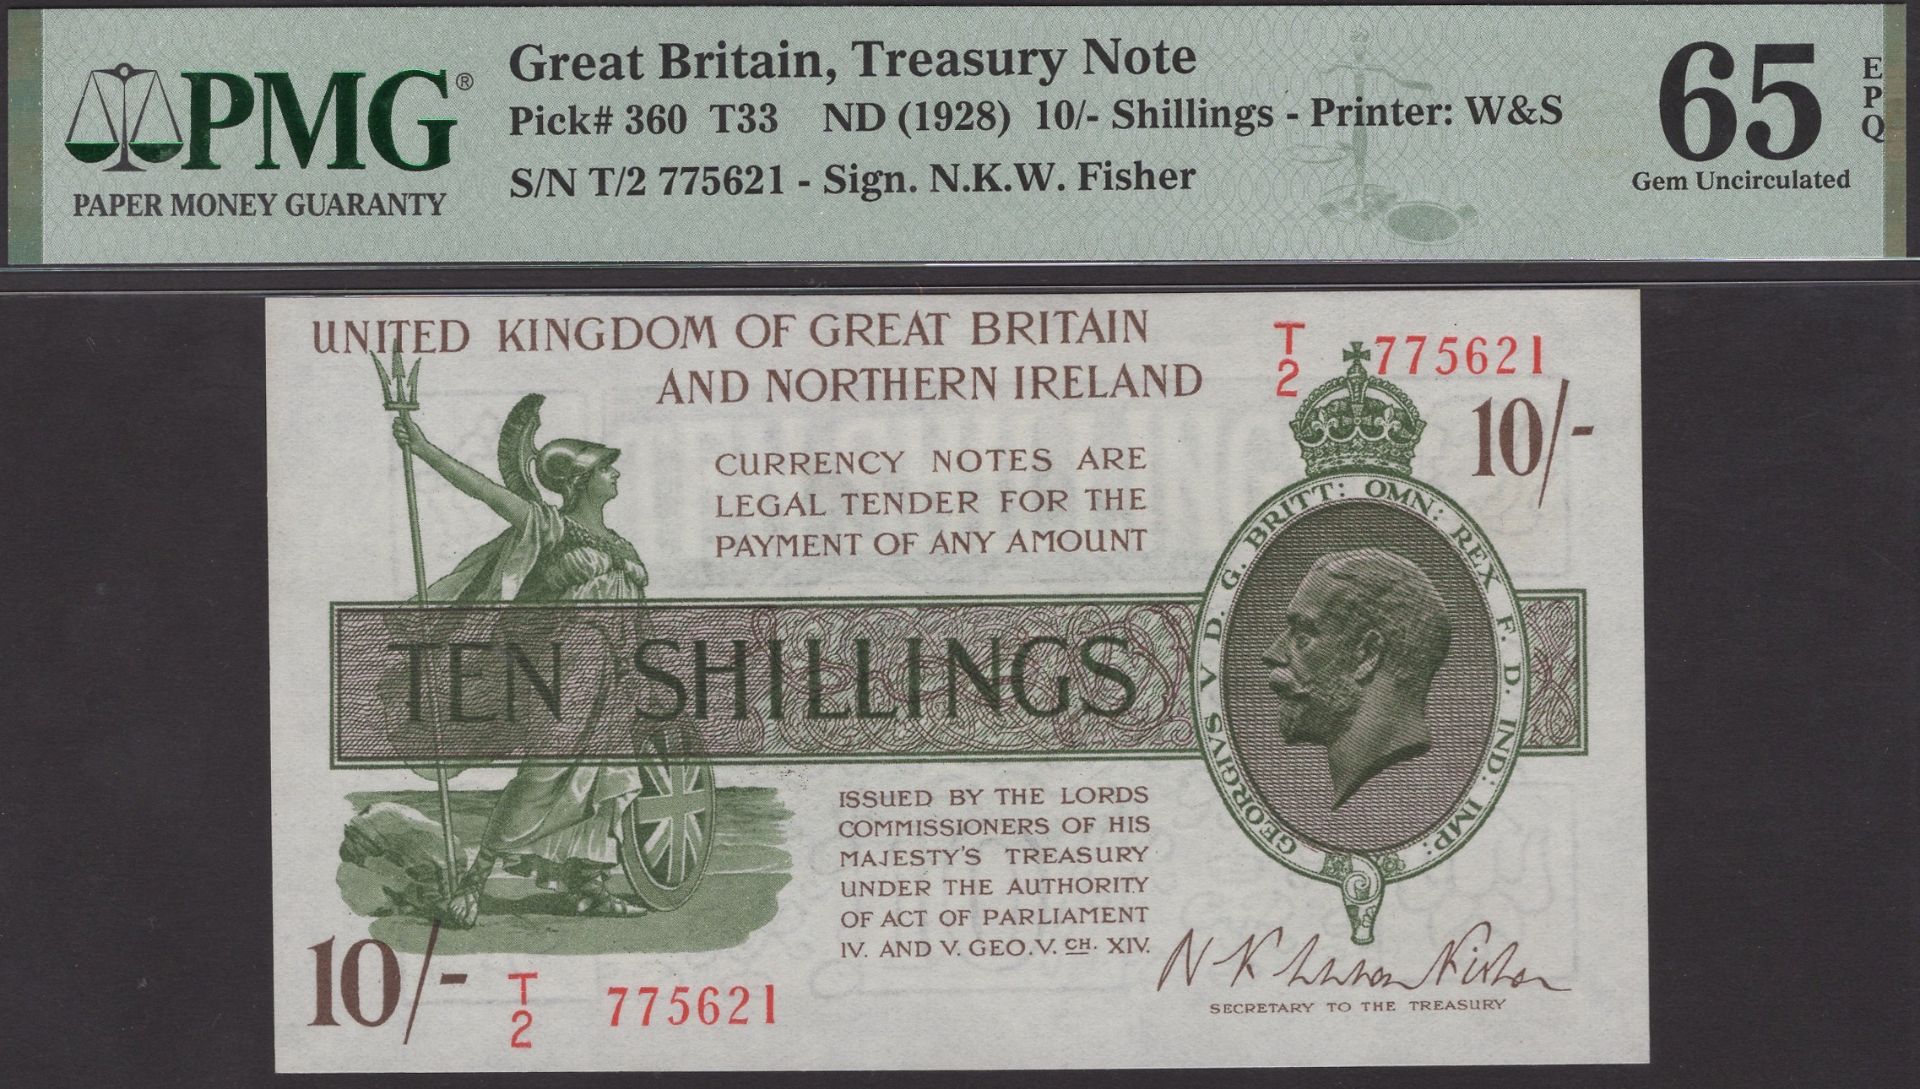 Treasury Series, Warren Fisher, 10 Shillings, 25 July 1927, serial number T/2 775621, in PMG...